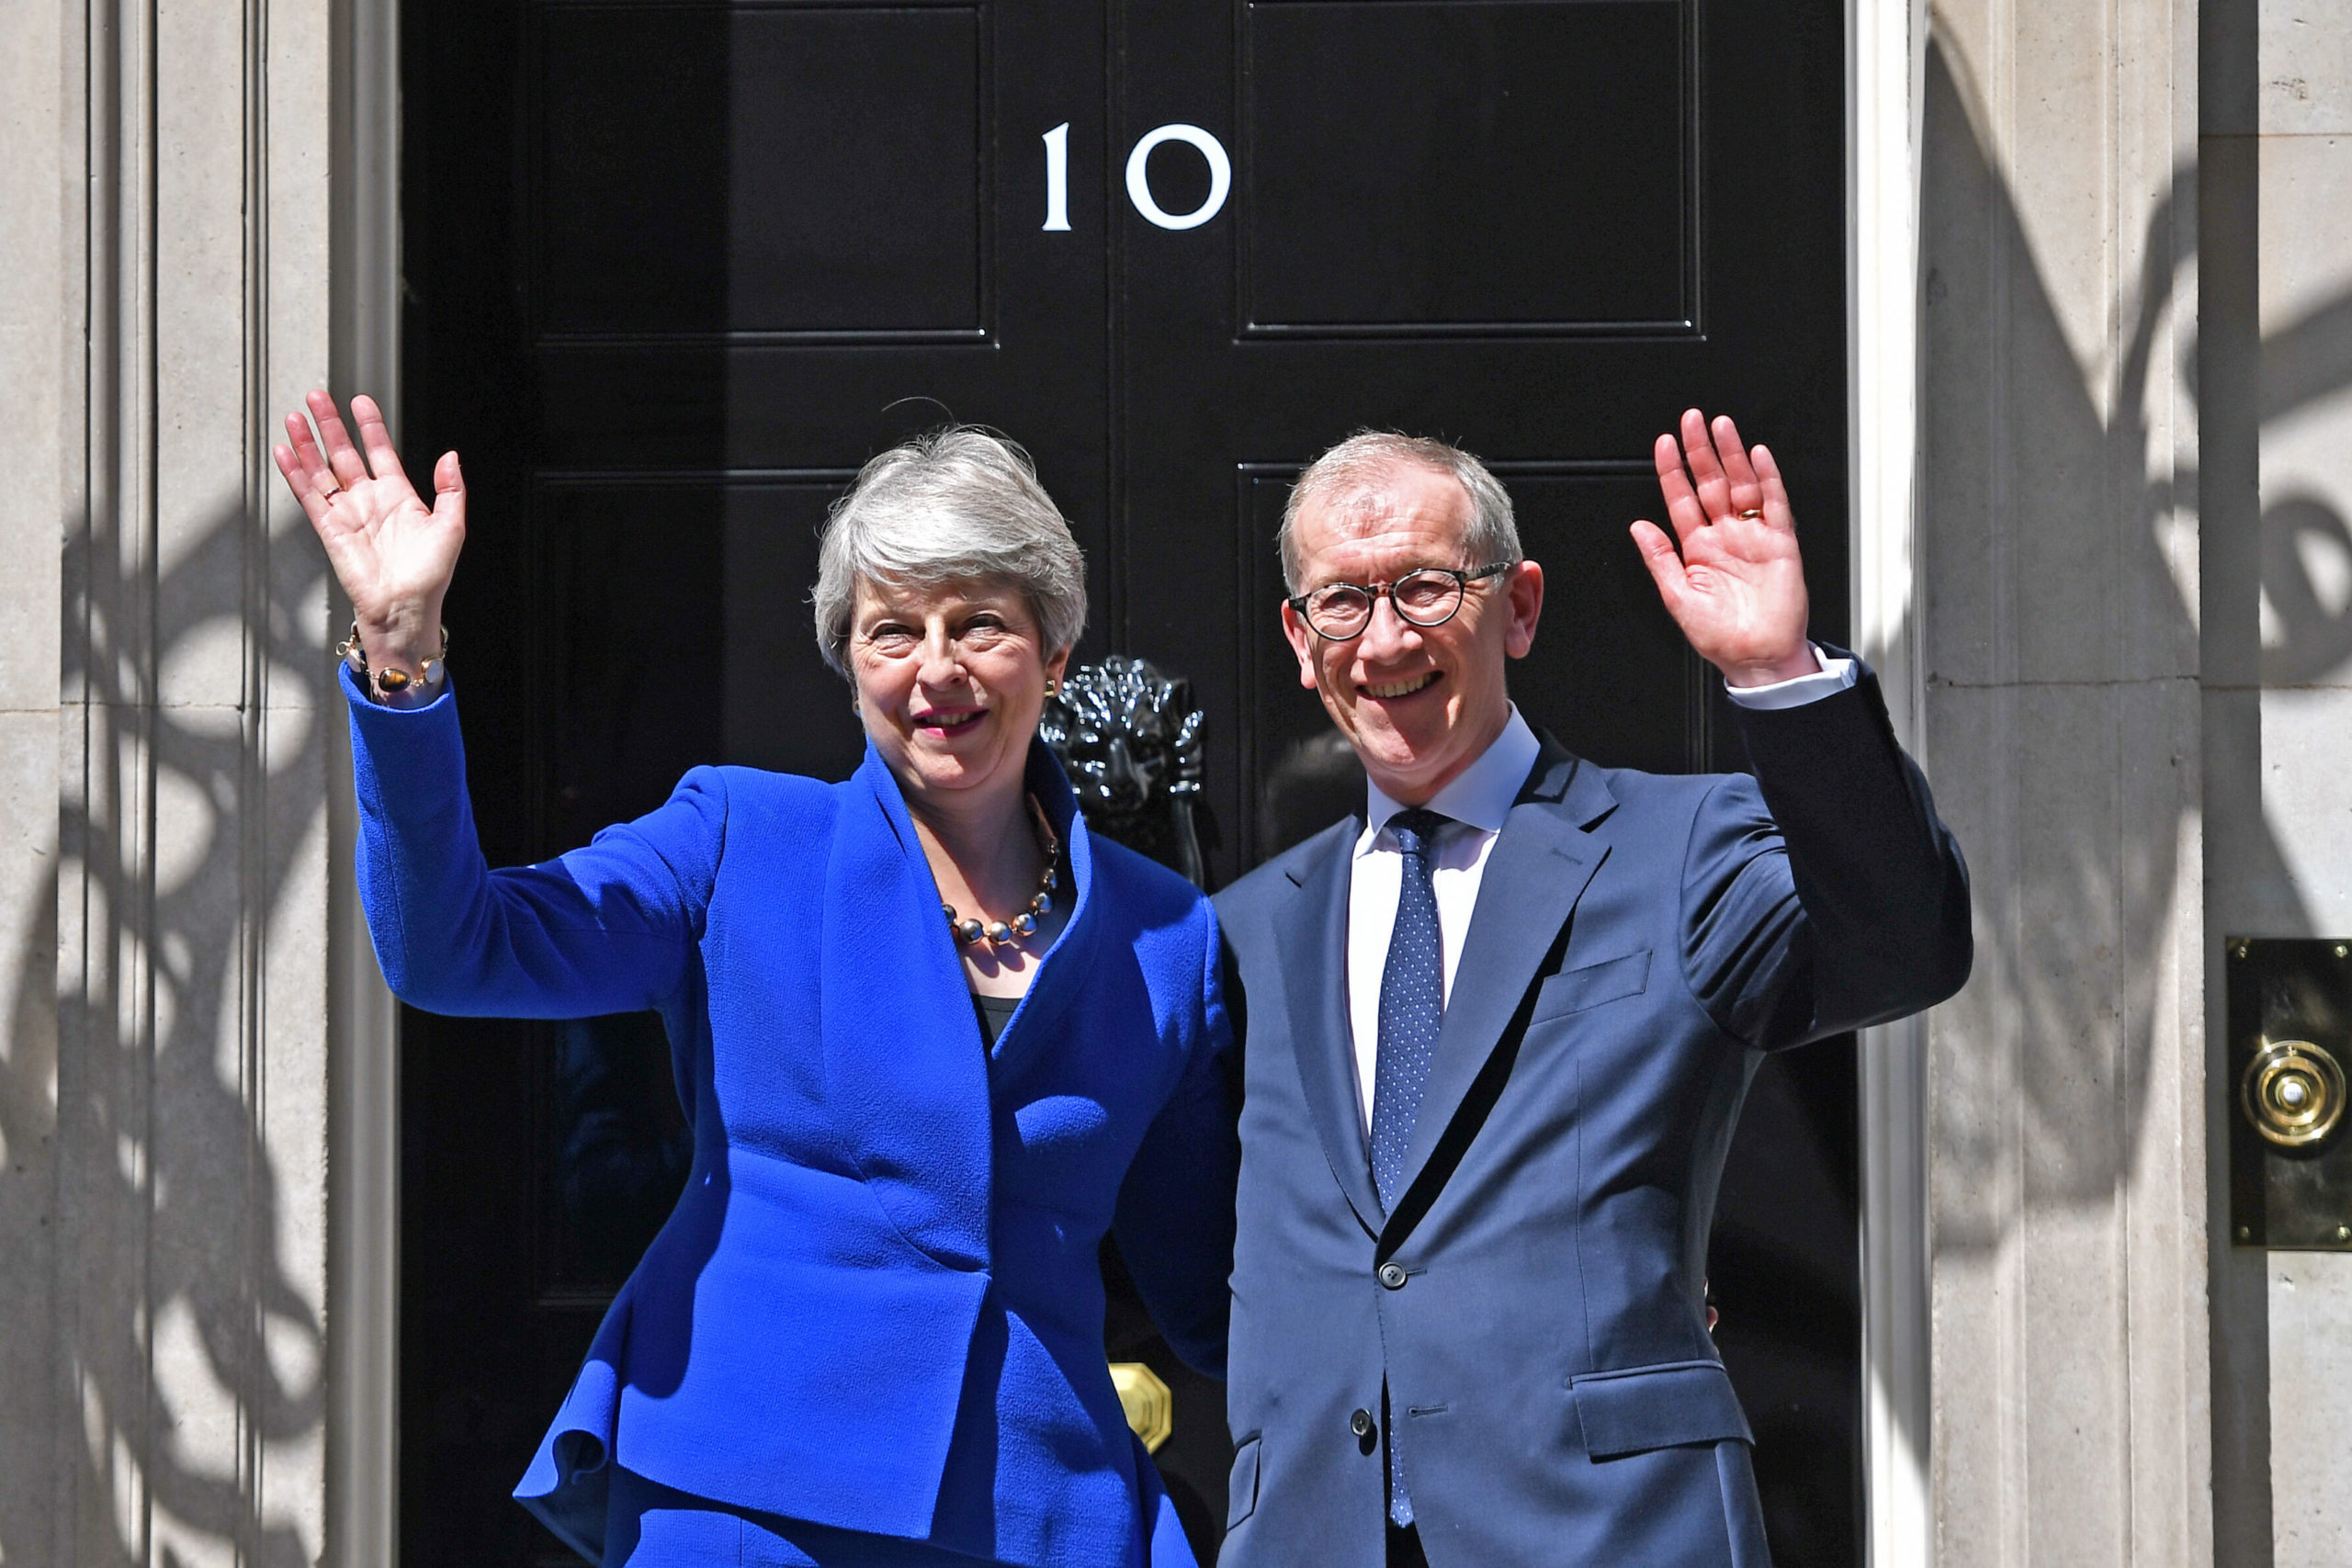 Outgoing Prime Minister Theresa May with husband Philip outside 10 Downing Street prior to handing in her resignation to the Queen at Buckingham Palace. Philip has been made a peer by Boris Johnson. And for what? Putting out the bins while his wife ran the country?